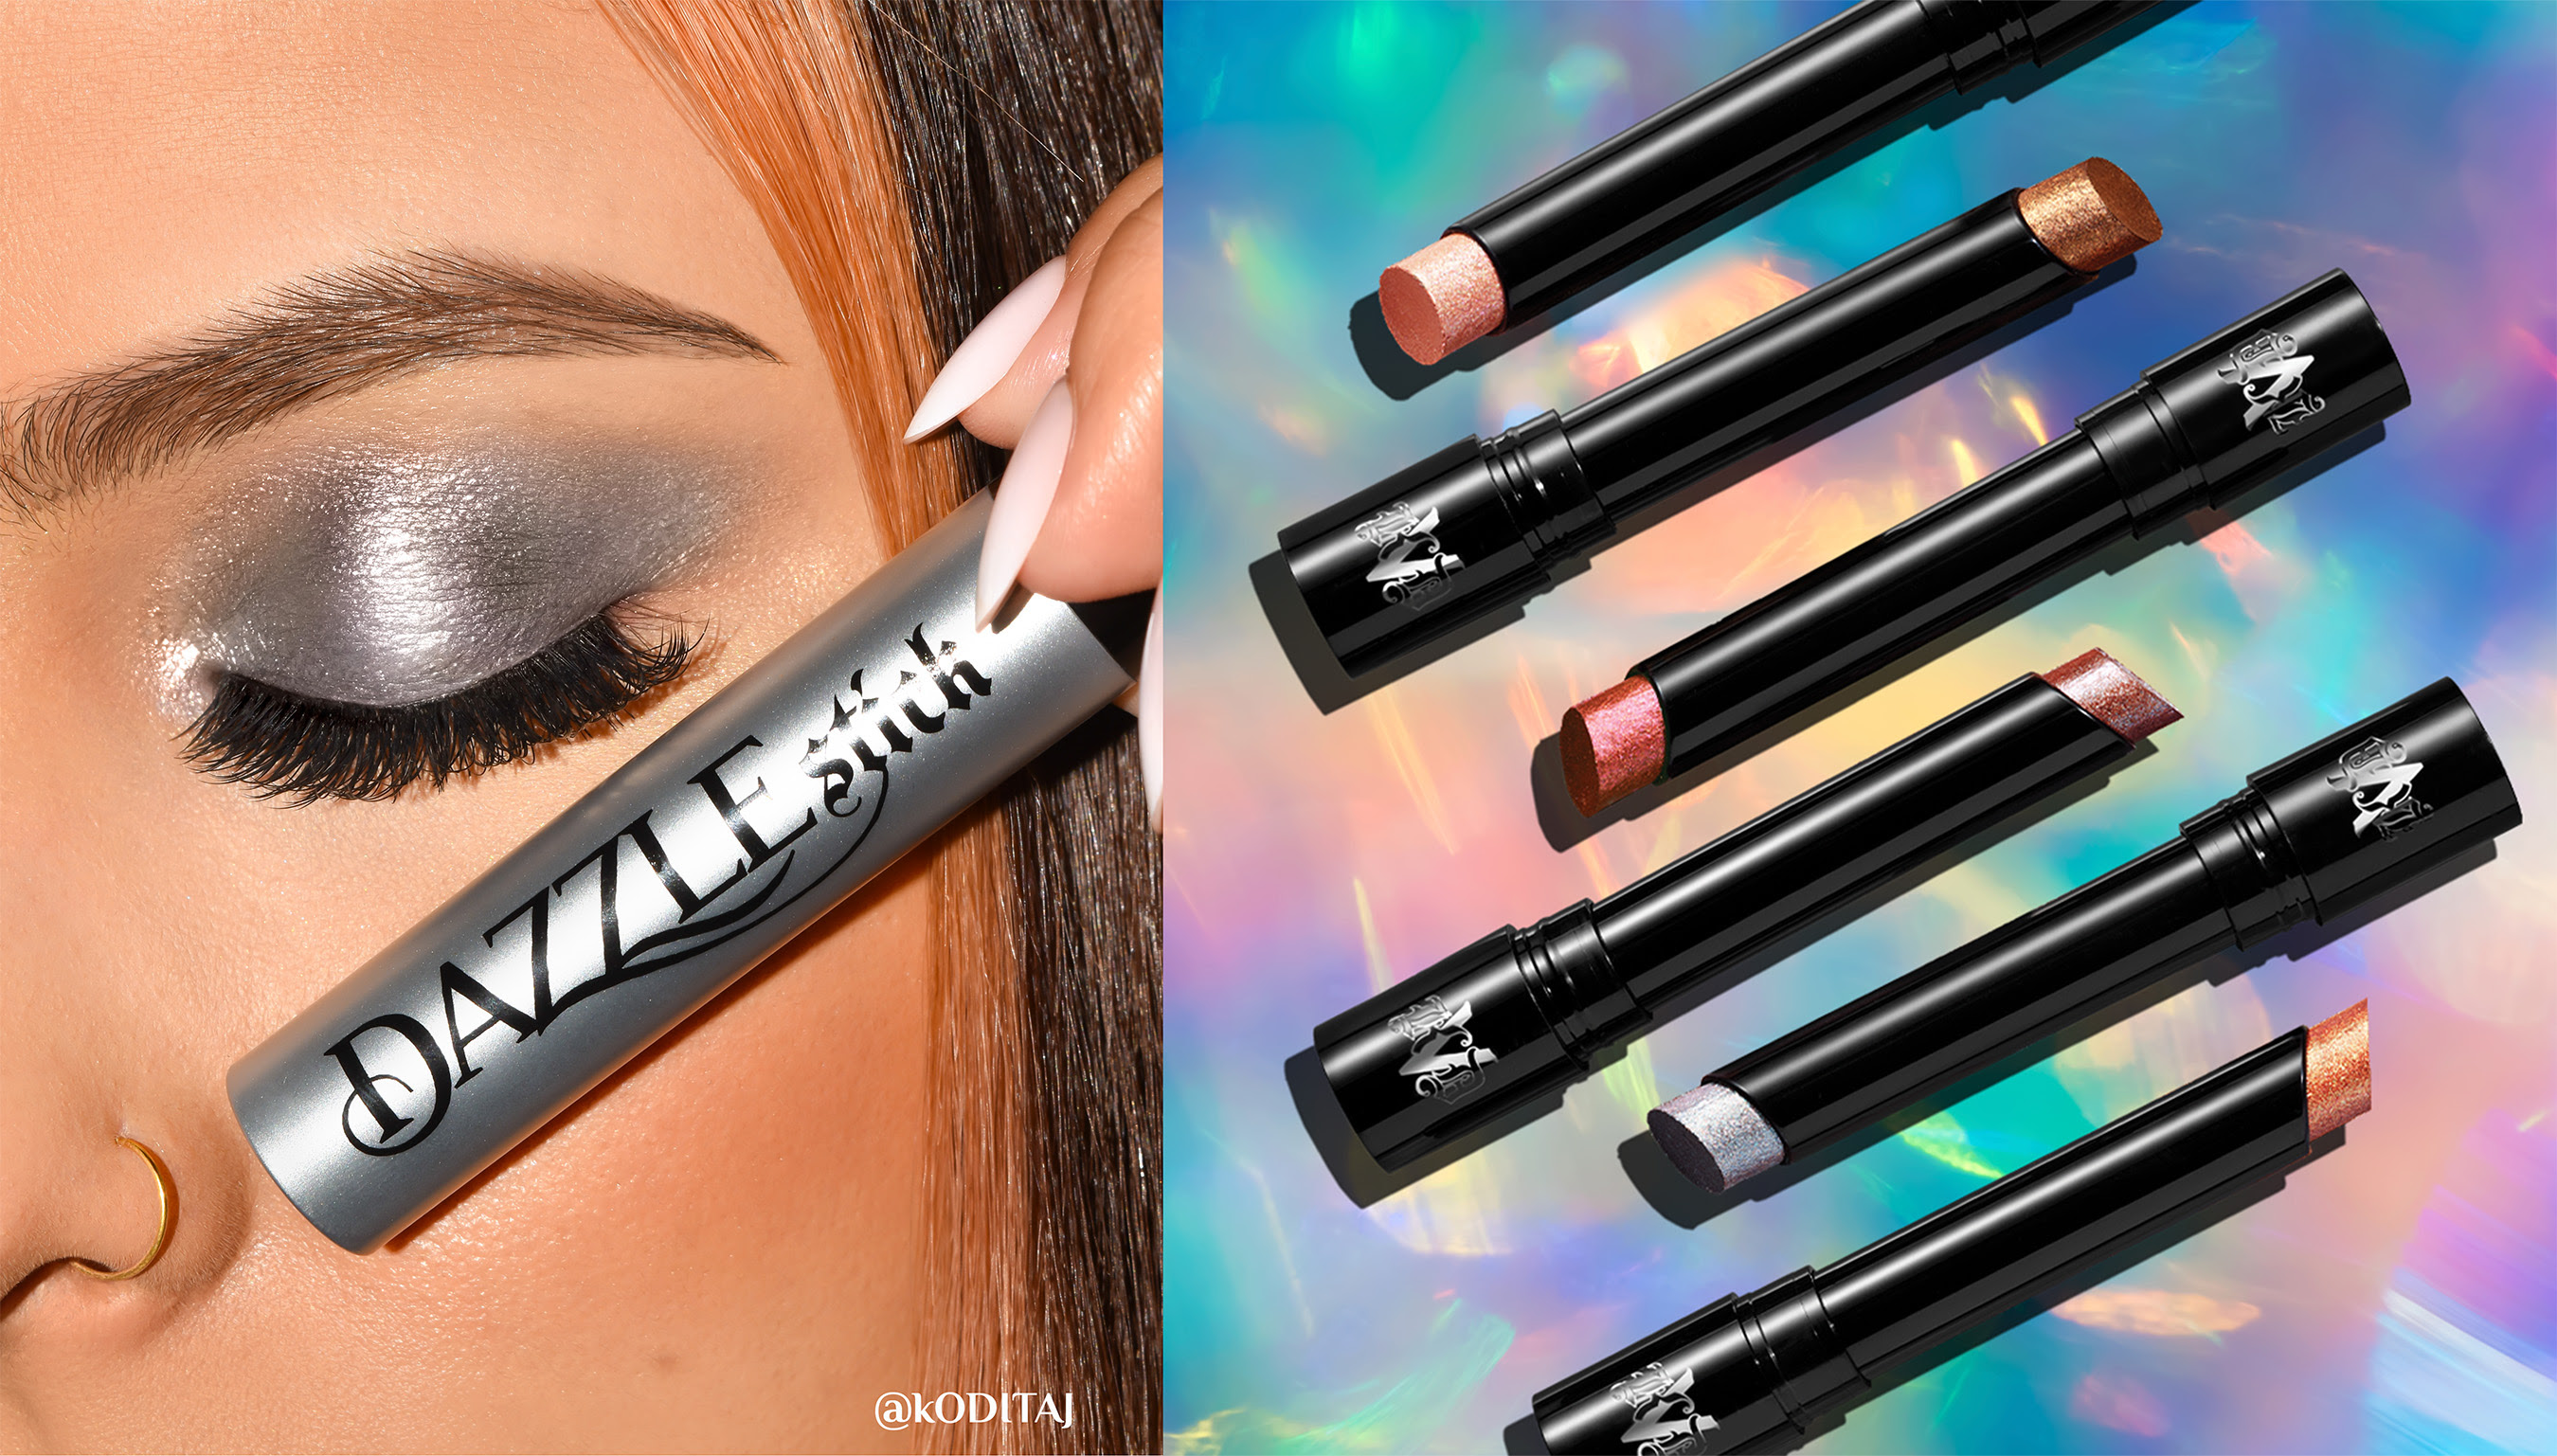 Dazzle Vegan Eyeshadow Sticks deliver multidimensional shimmering shadow in a flash, without the mess of loose glitter.